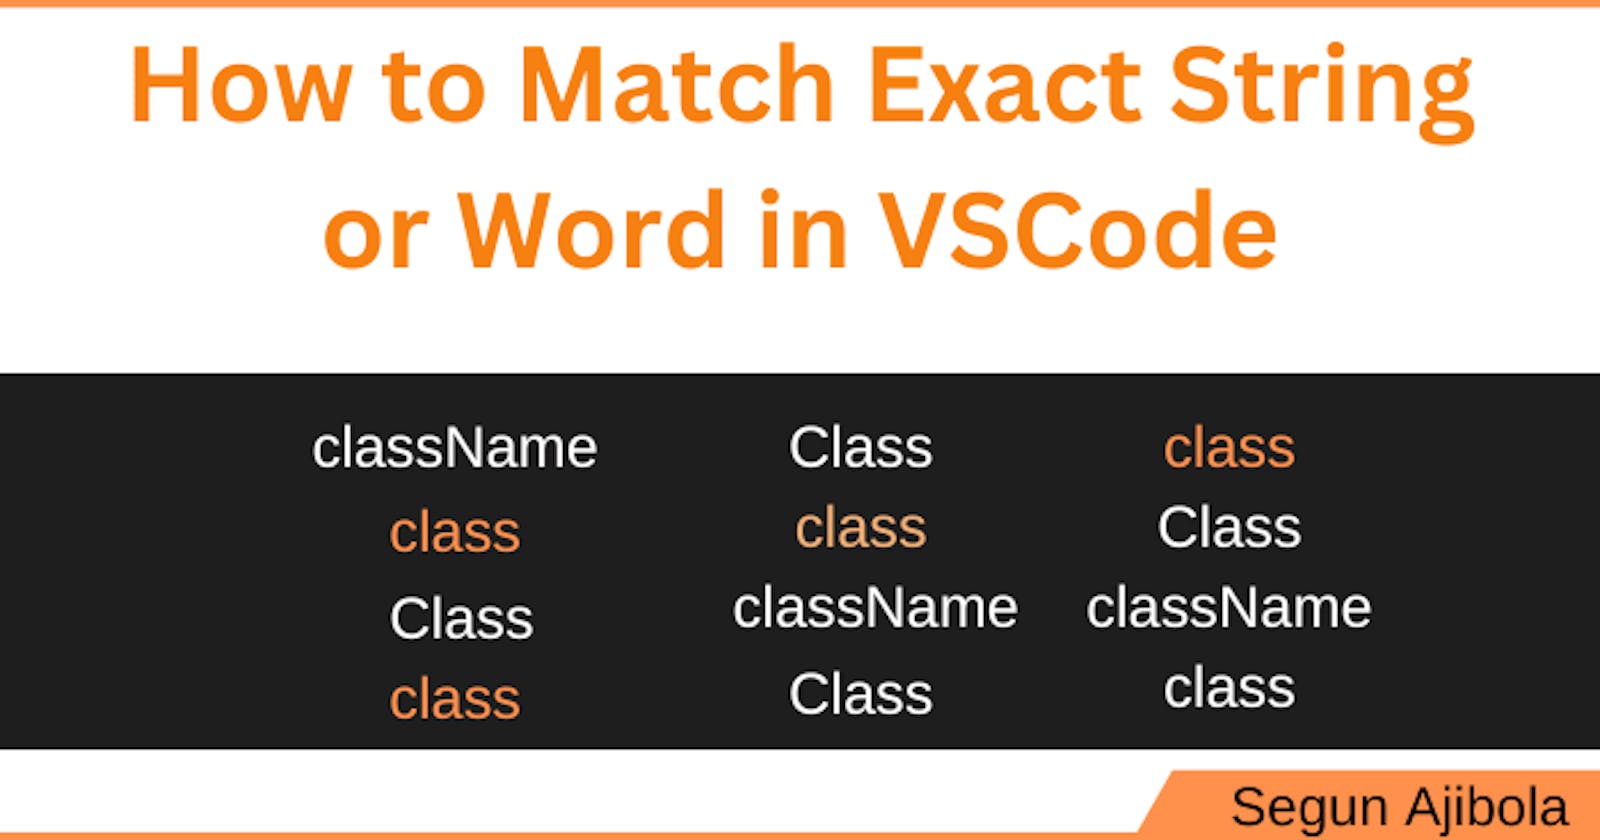 How to Match Exact String or Word in VSCode